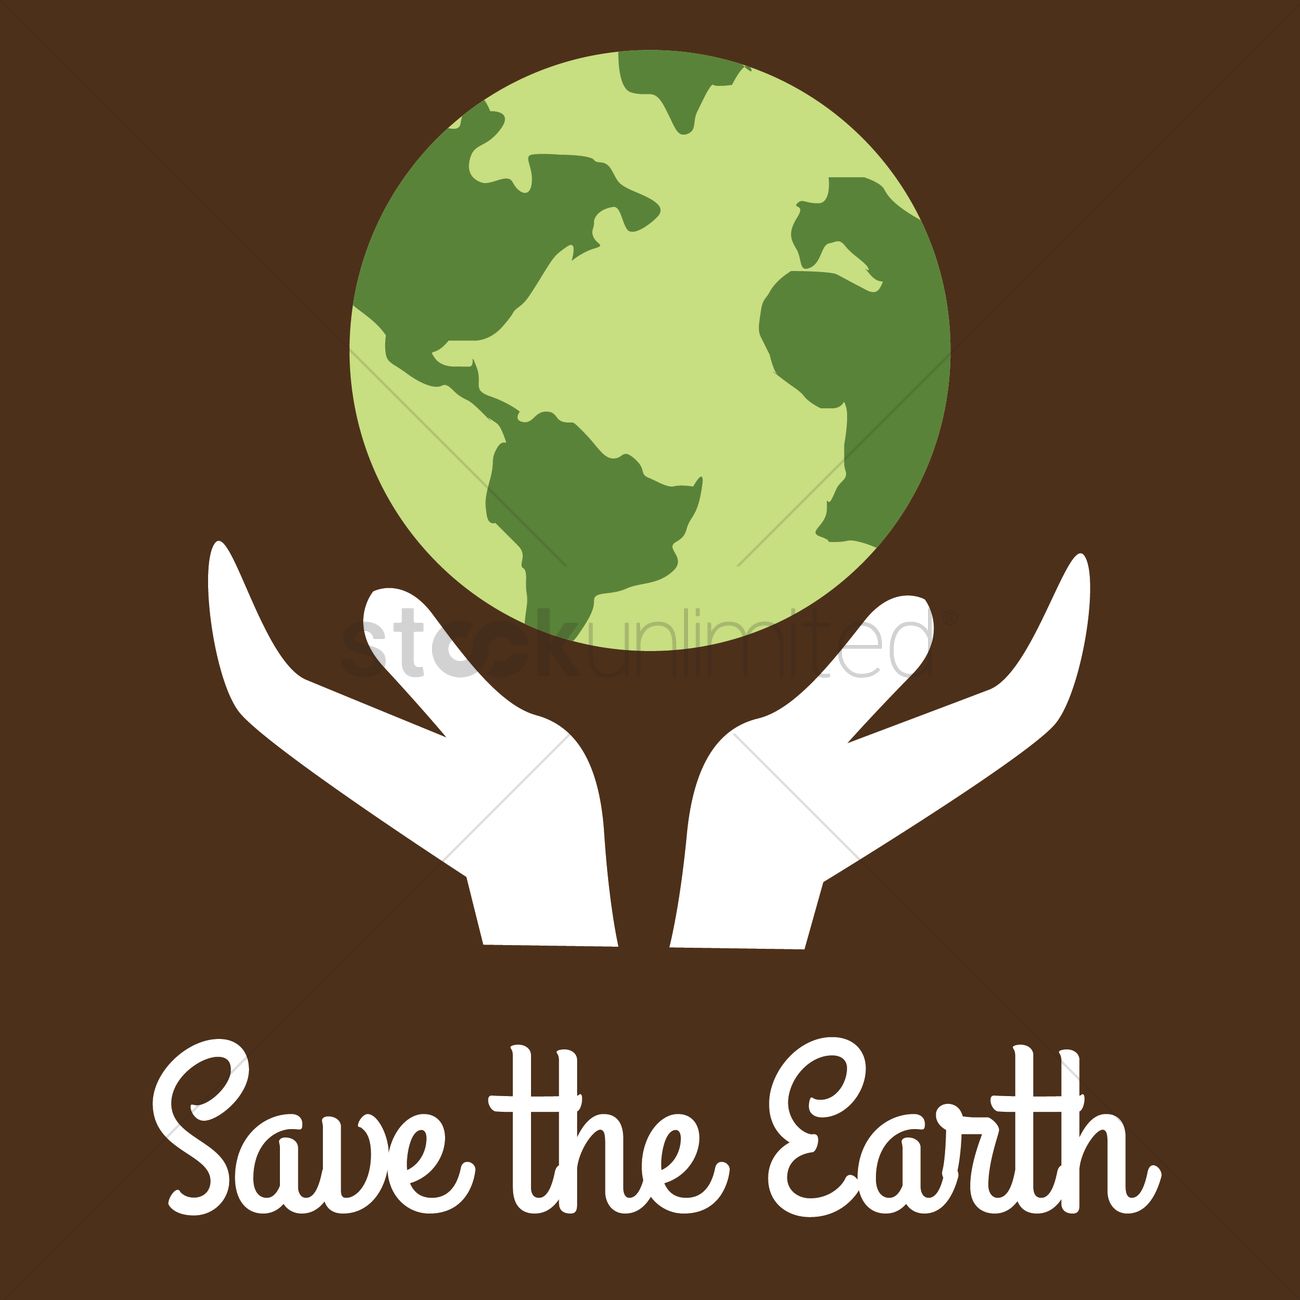 Save the earth wallpaper Vector Image